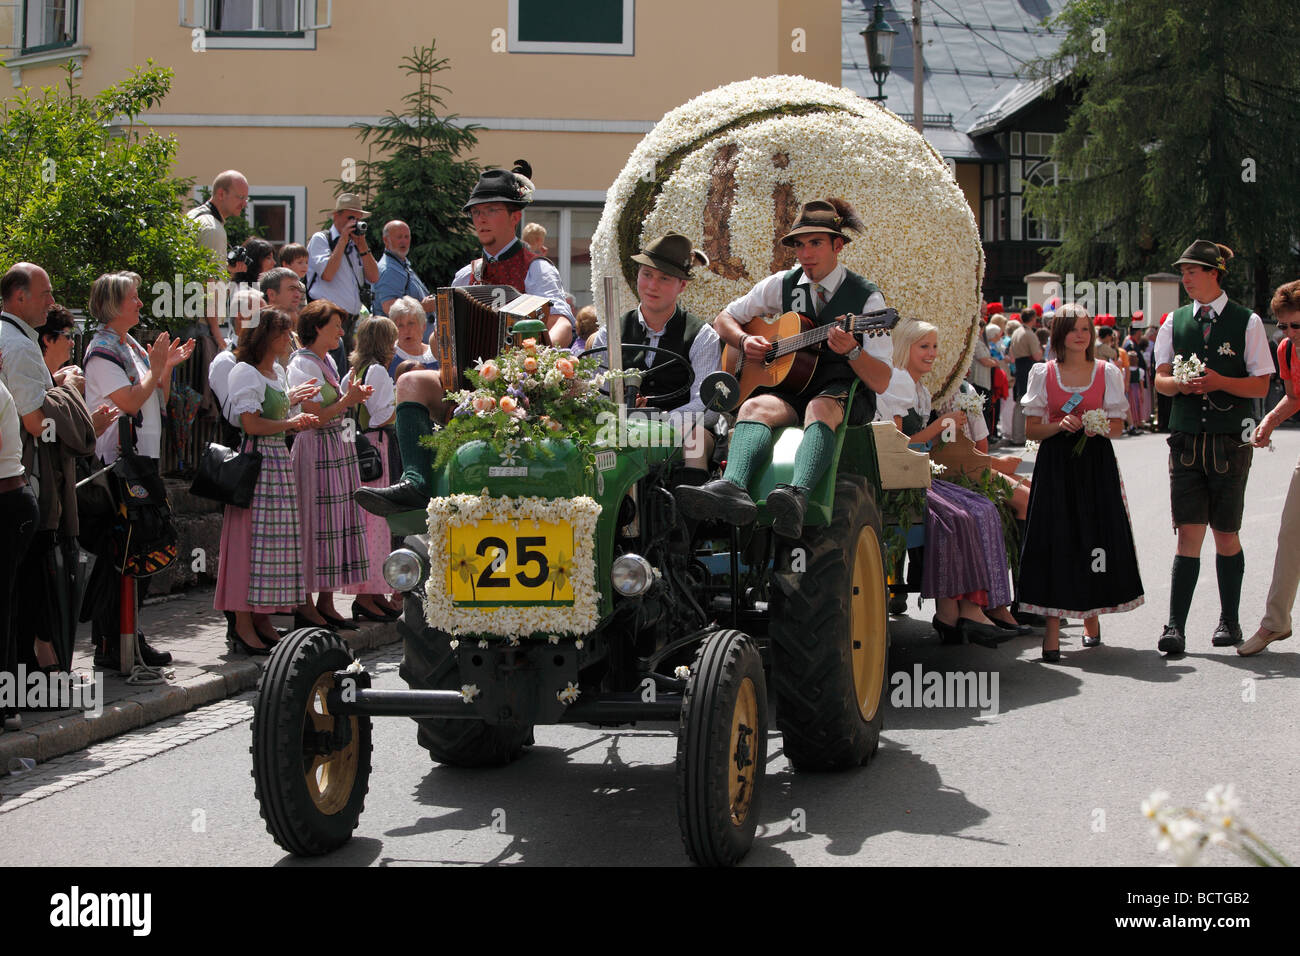 Tractor with tennis ball from daffodils, Narzissenfest Narcissus Festival in Bad Aussee, Ausseer Land, Salzkammergut area, Styr Stock Photo